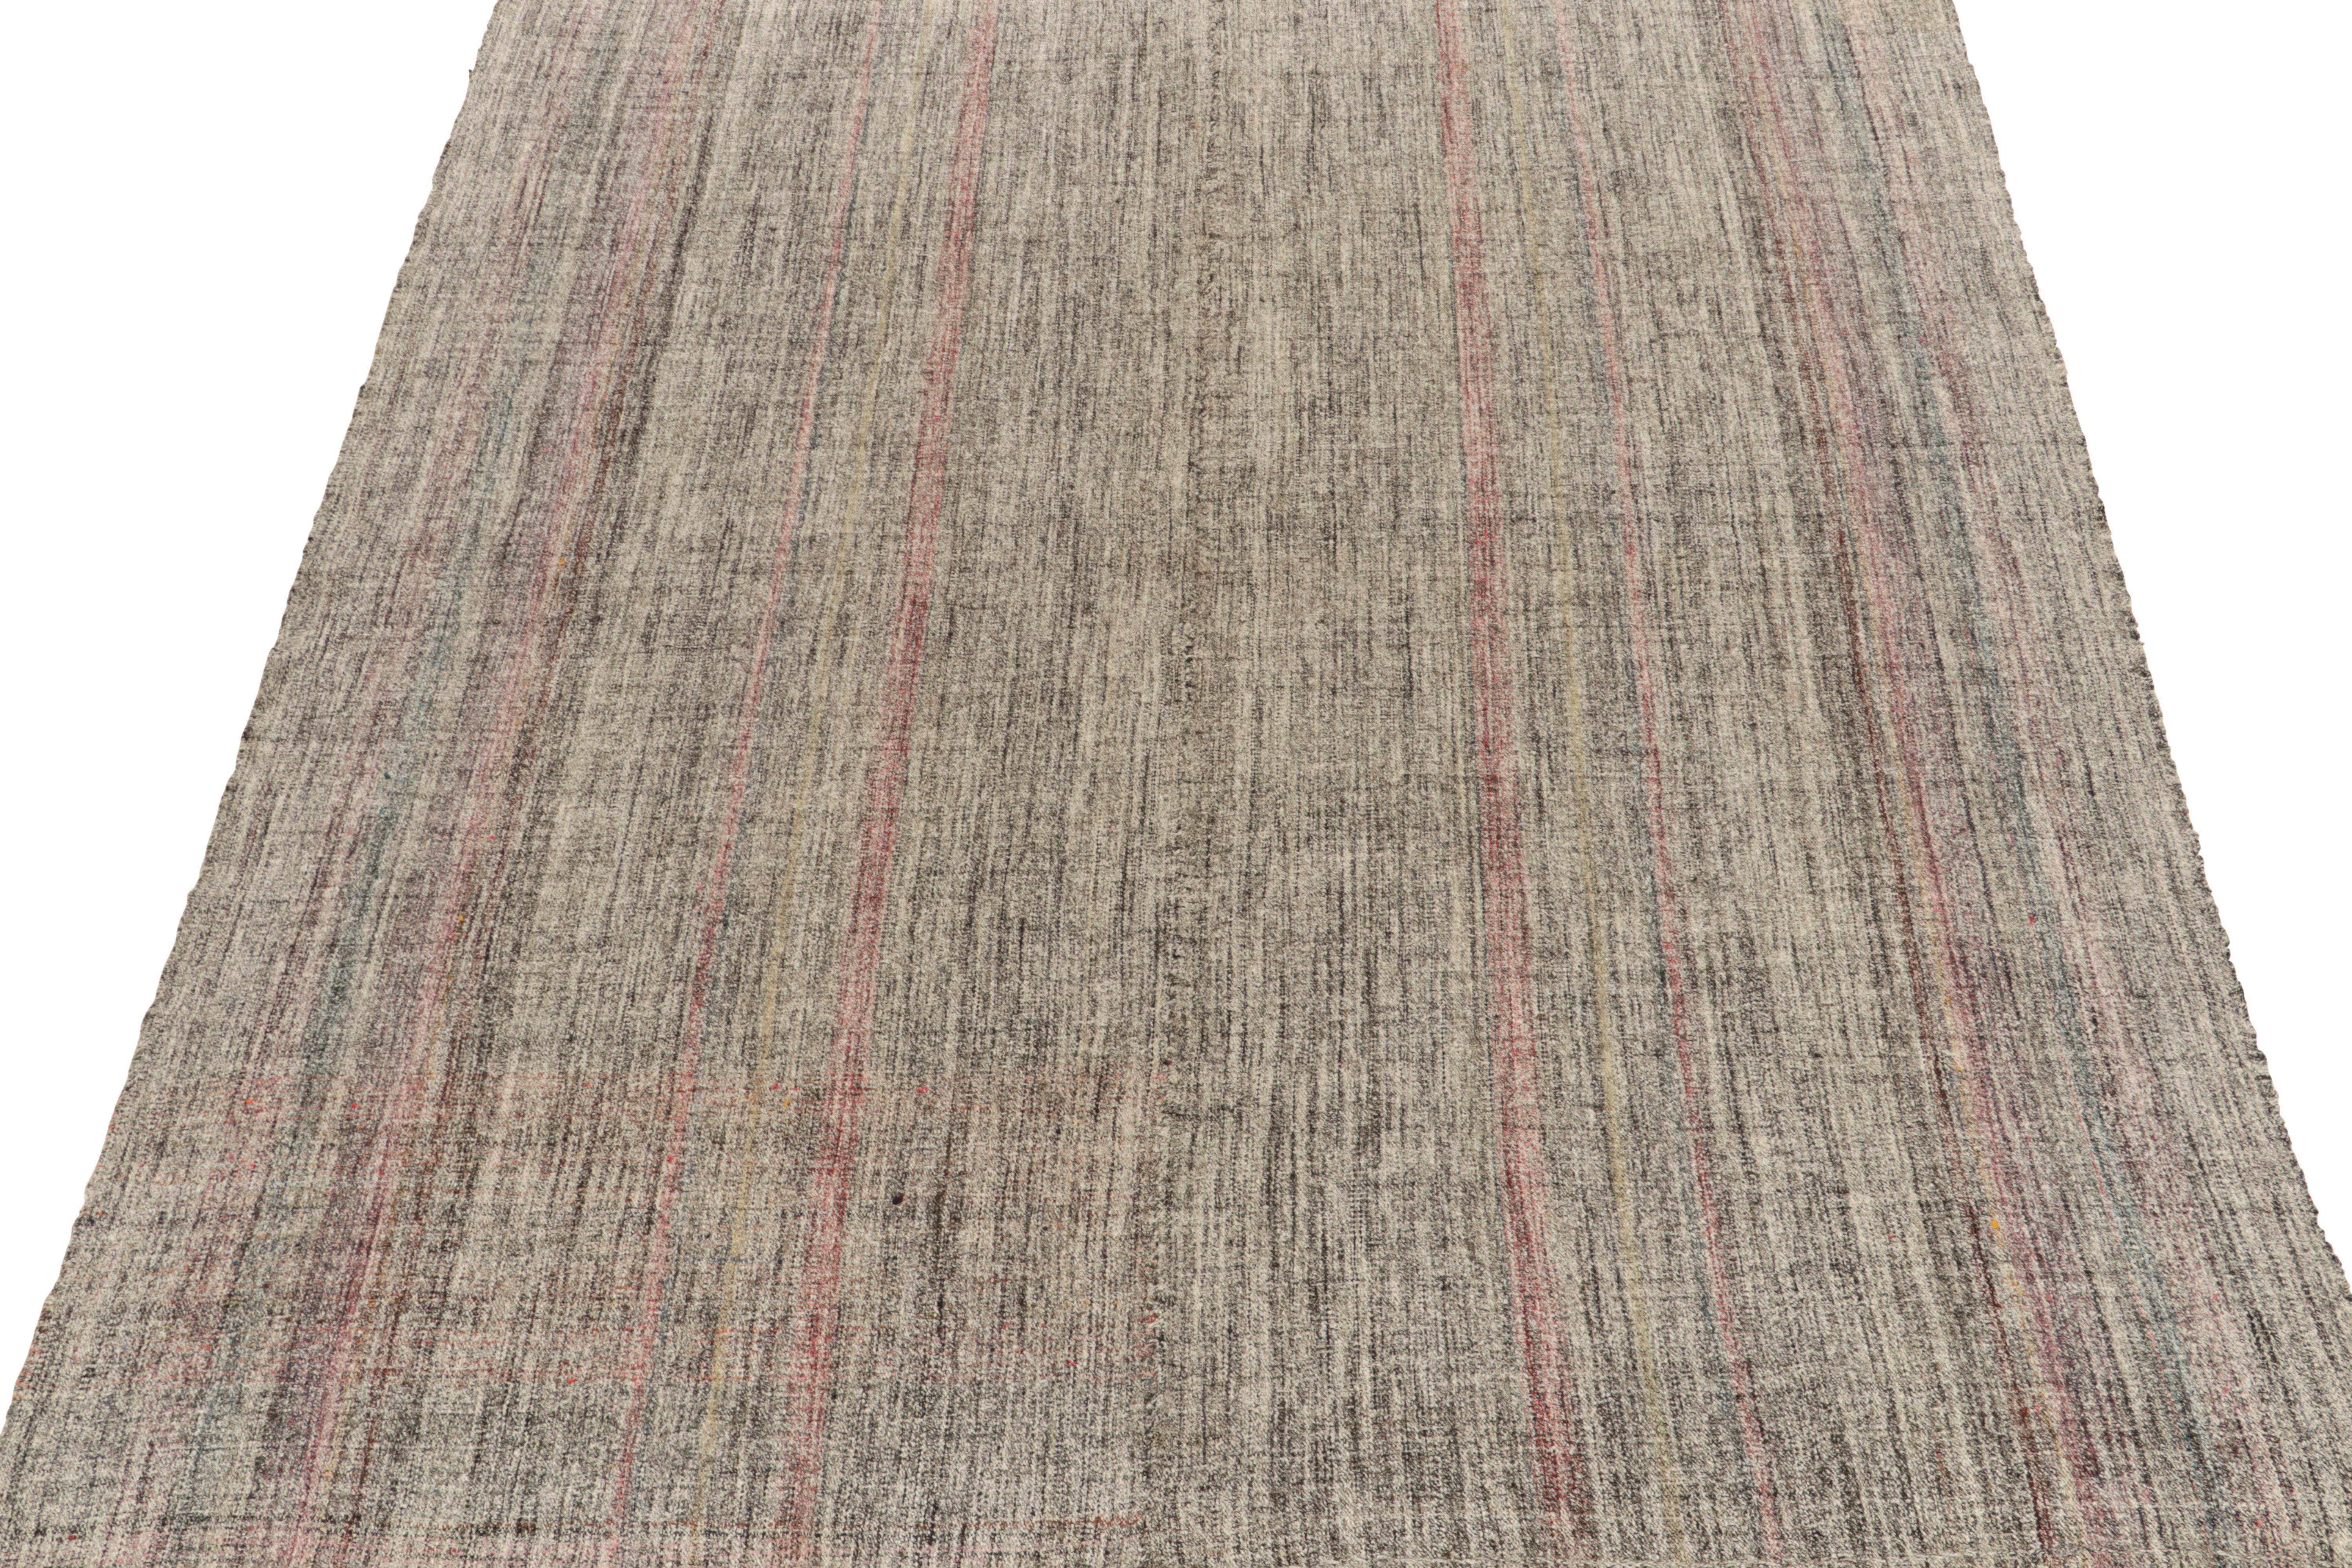 Connoting minimalist midcentury aesthetics, a vintage kilim rug from our flatweave selections. Originating from Turkey, the rug relishes midcentury aesthetics with white & black punctuated by light pink striations for a refreshing interpretation in